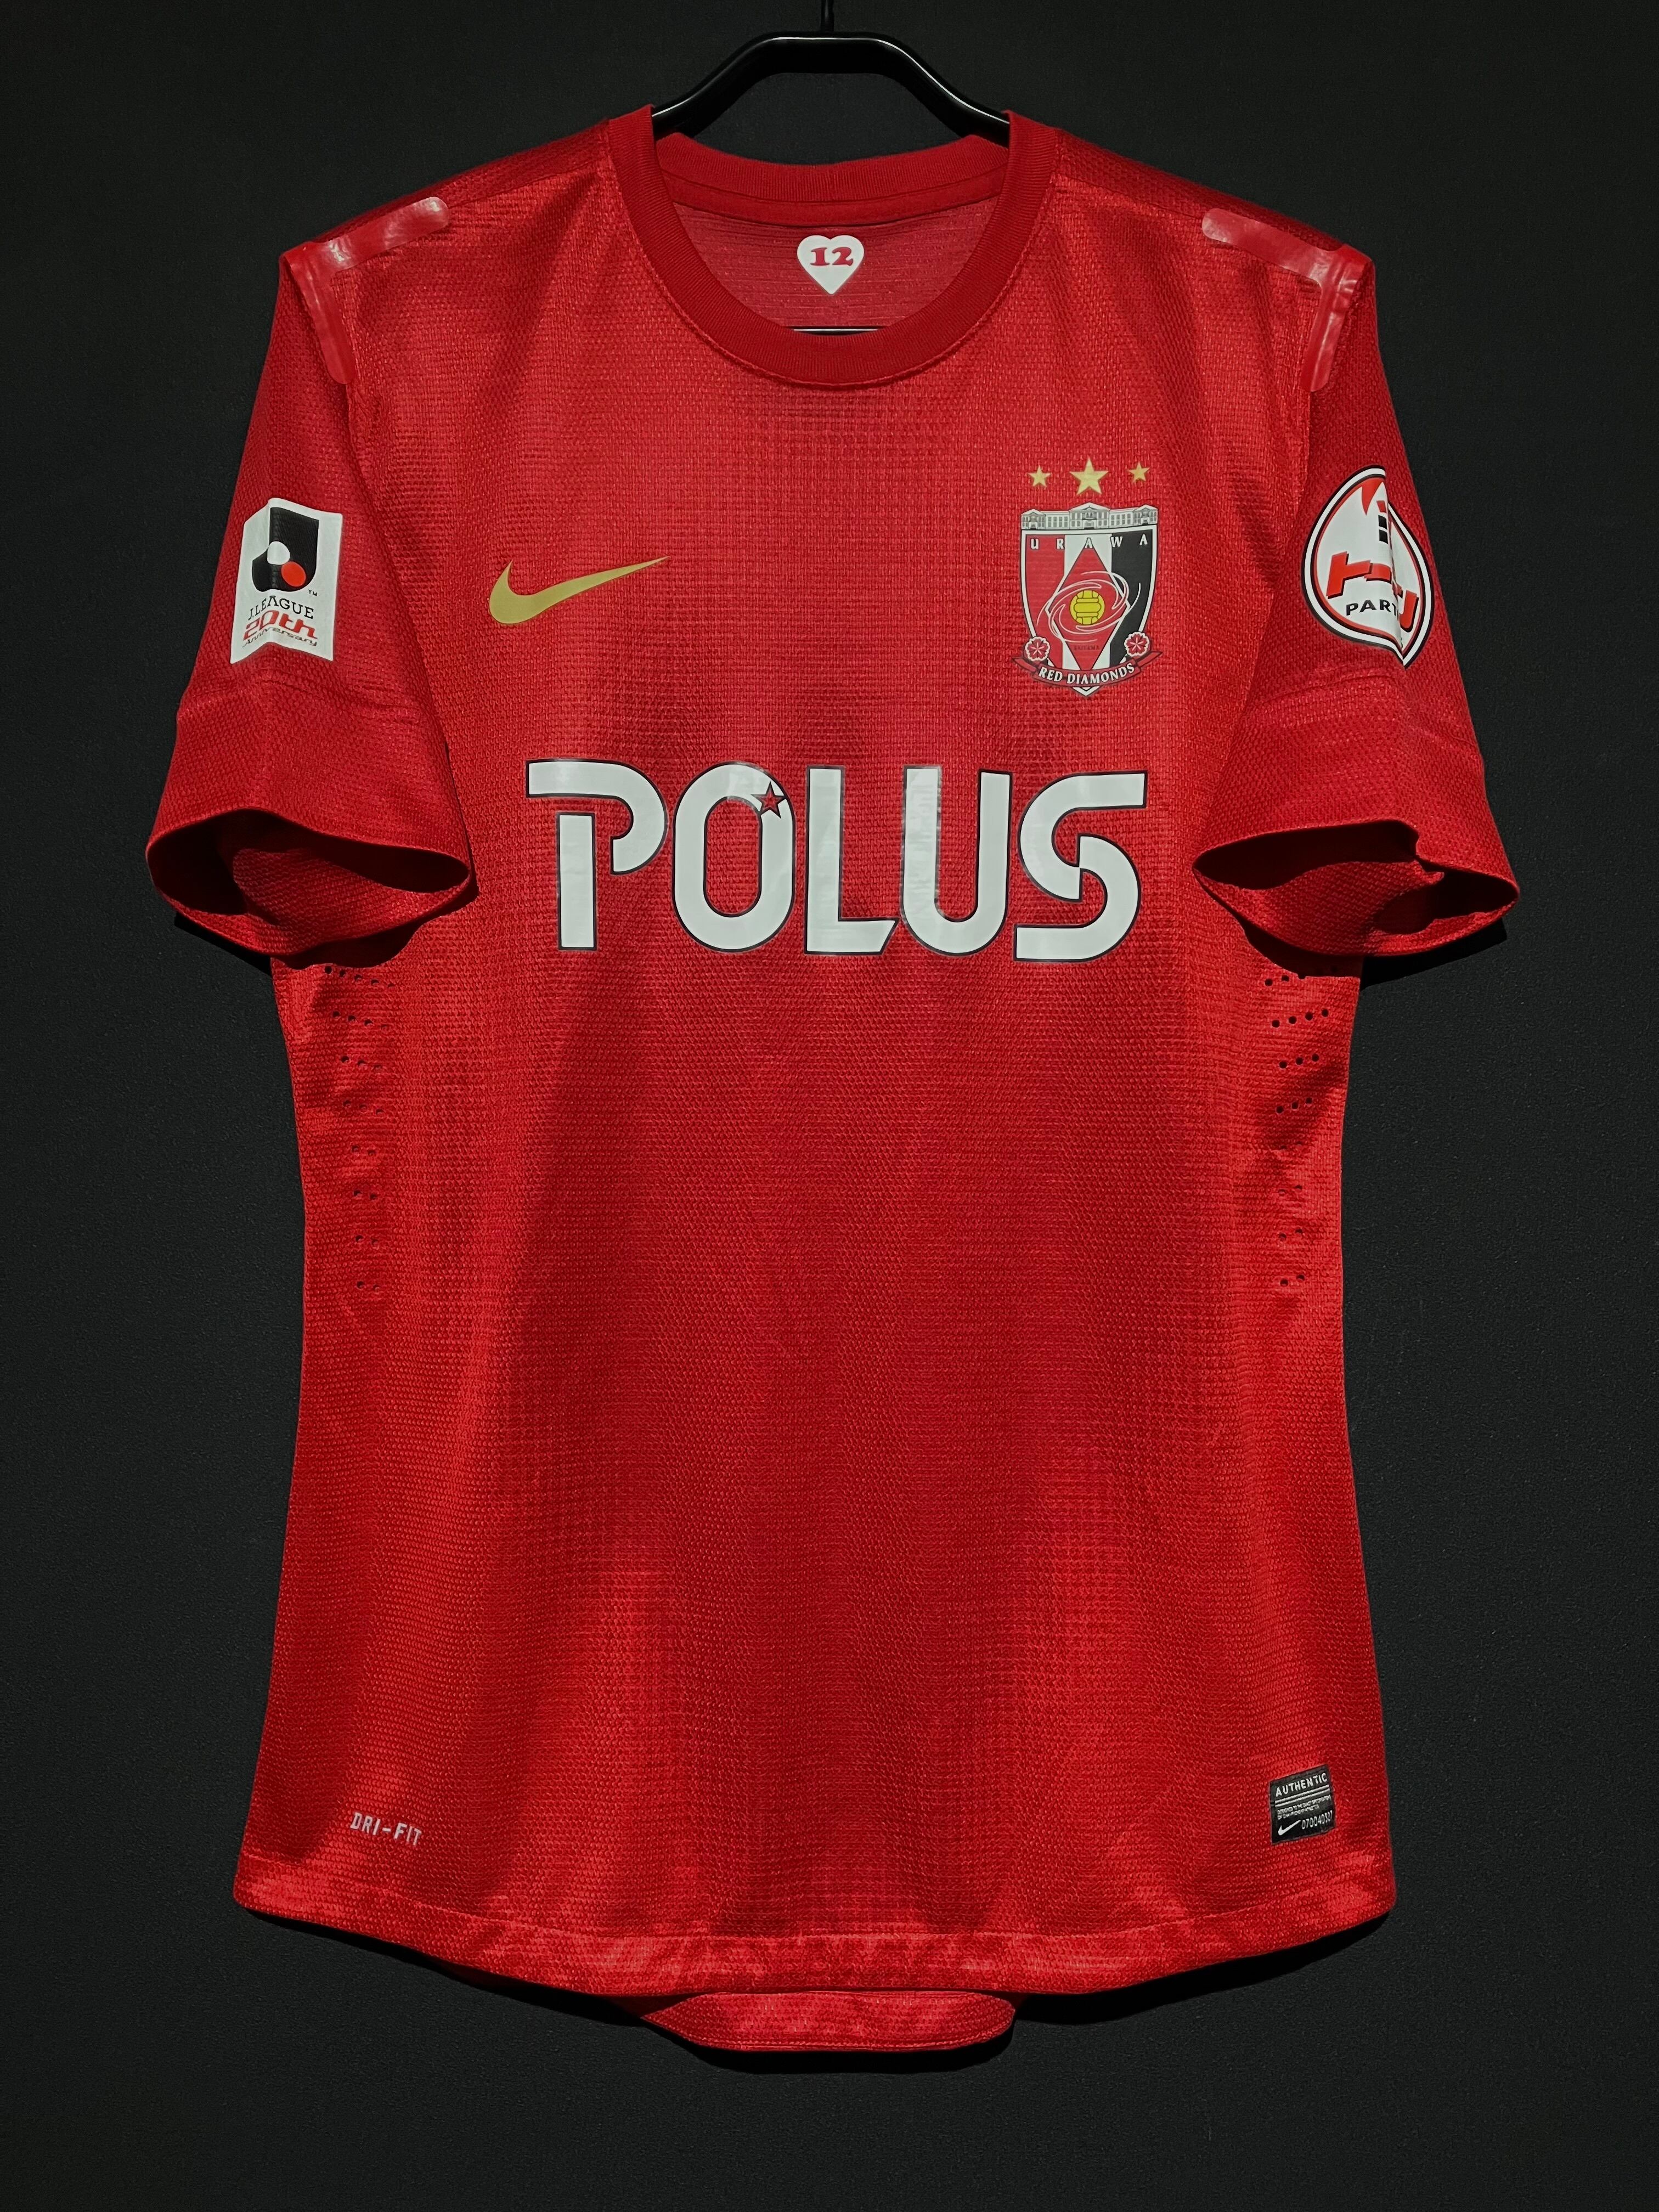 2013】 Urawa Red Diamonds（H） Condition：Preowned Grade：5 Size：XL  Authentic Jerseum Store